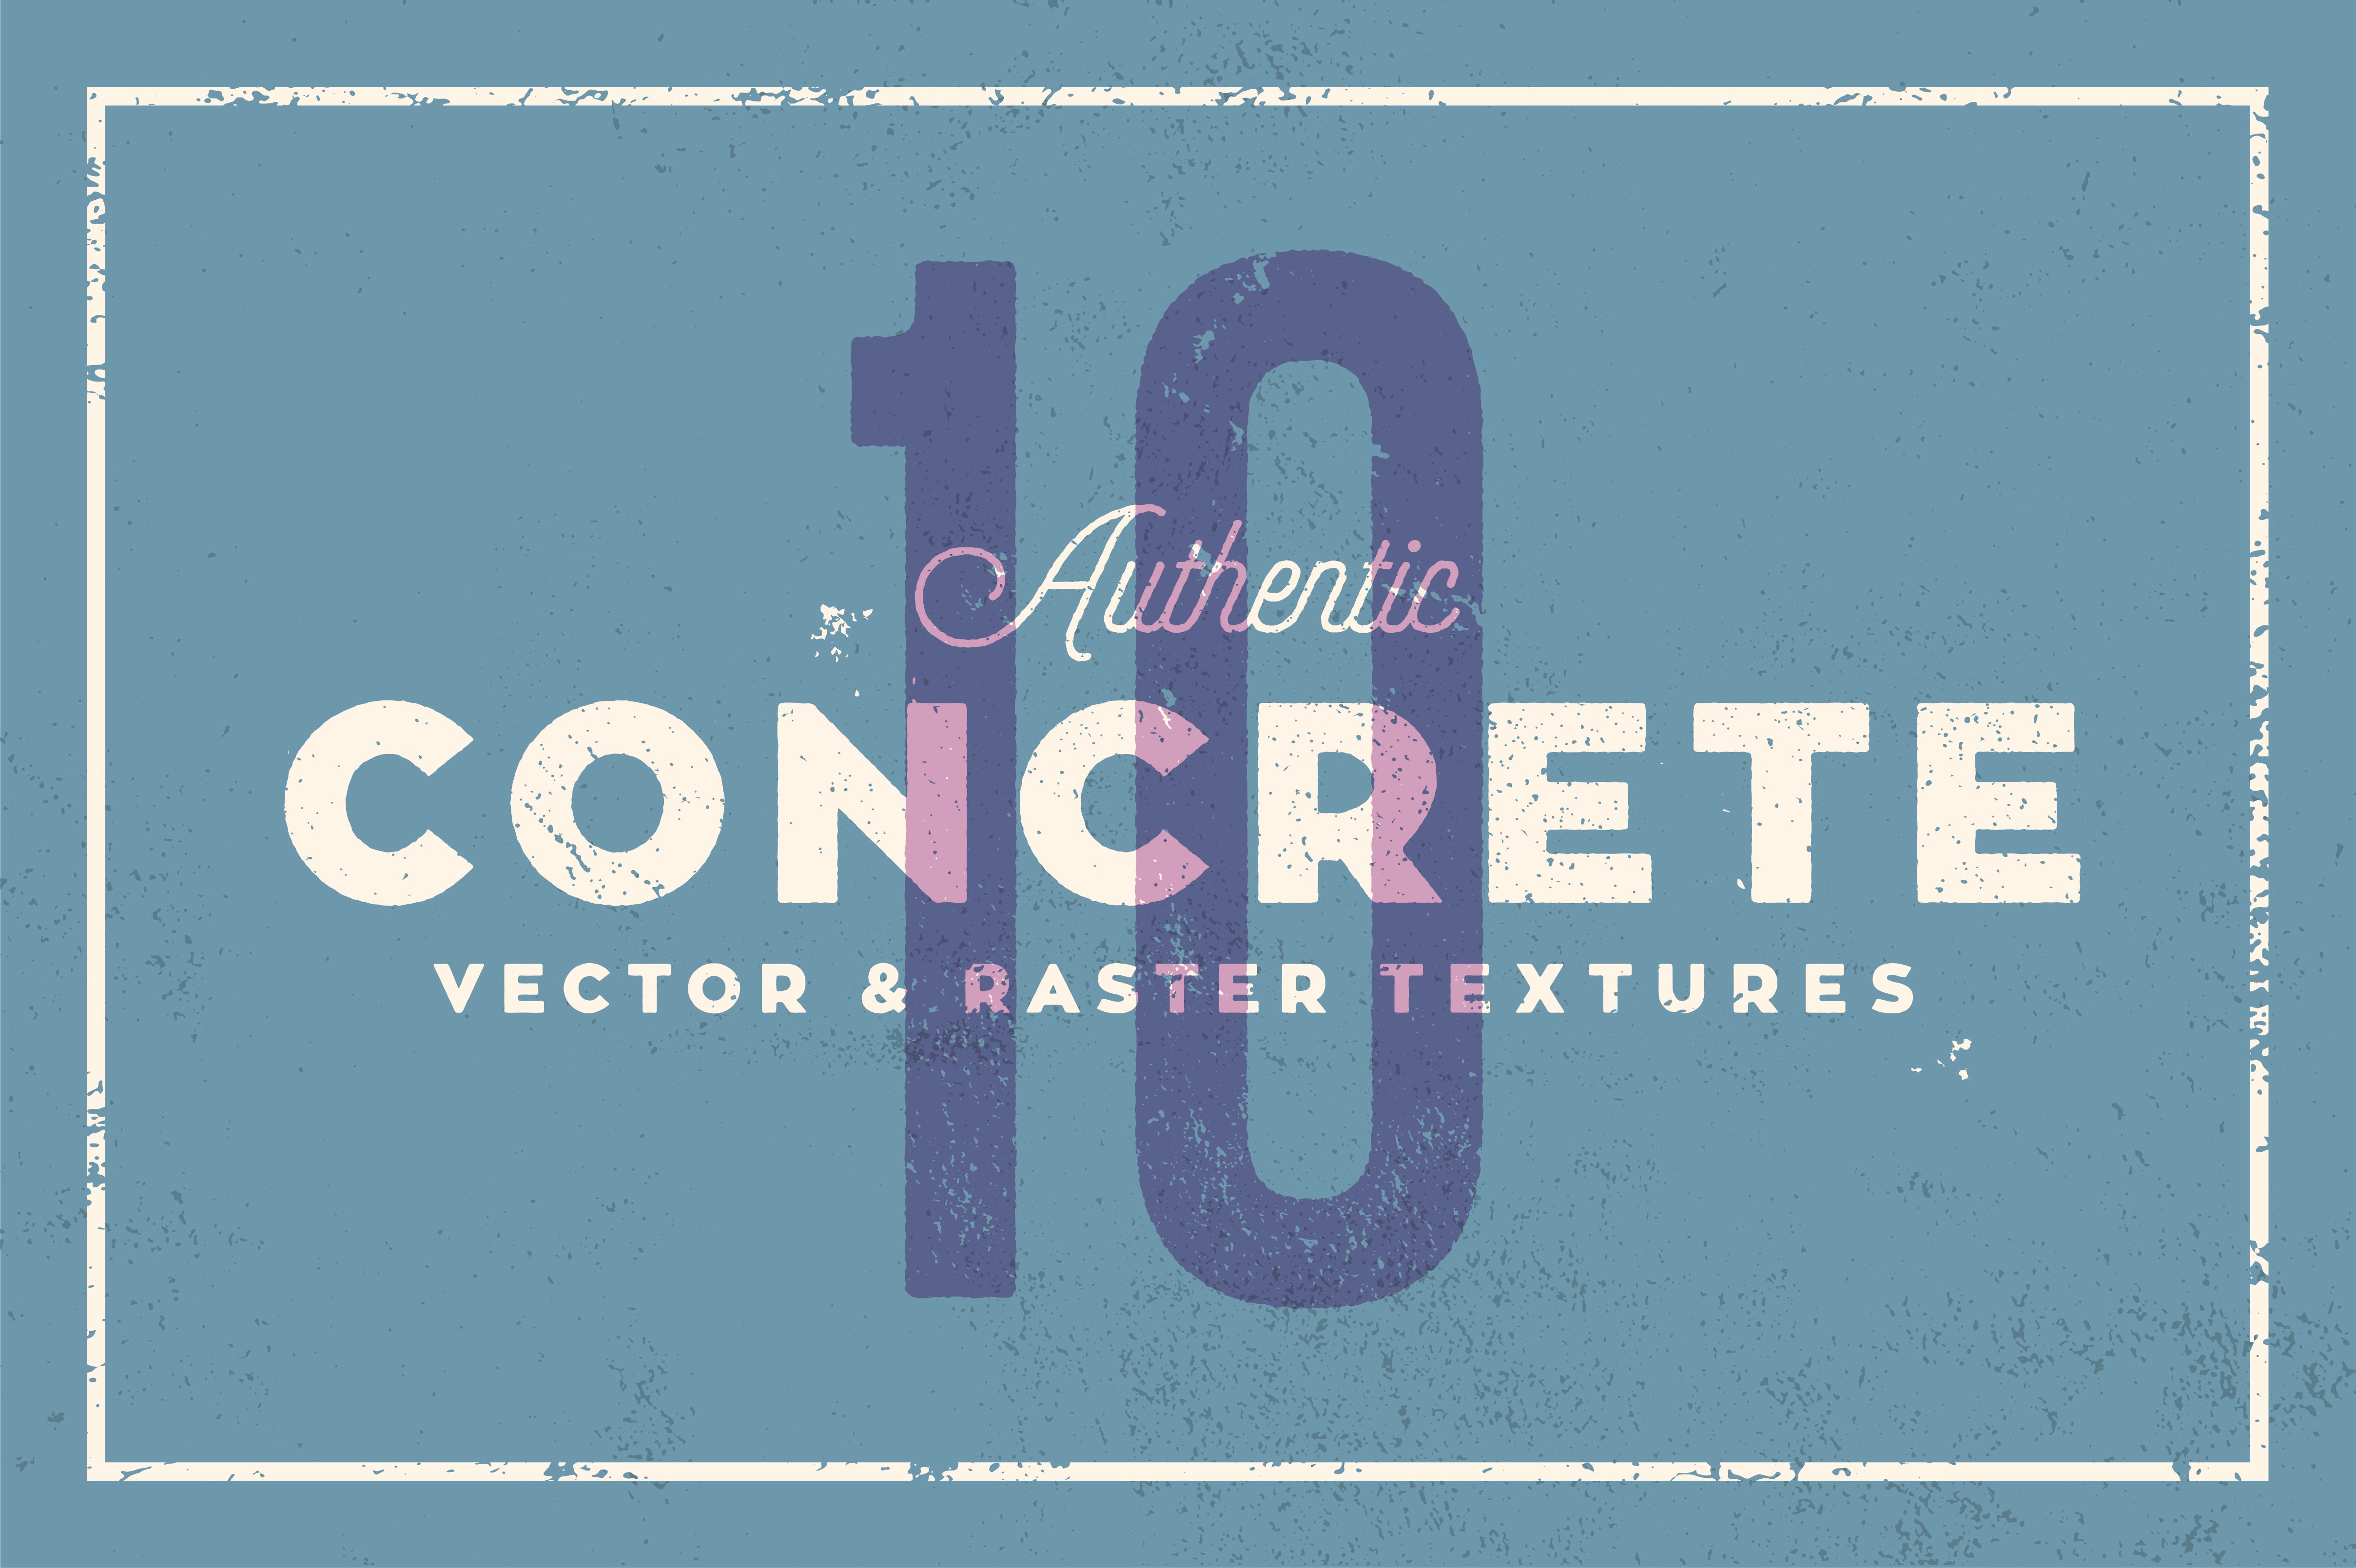 Concrete Textures (10 Pack) cover image.